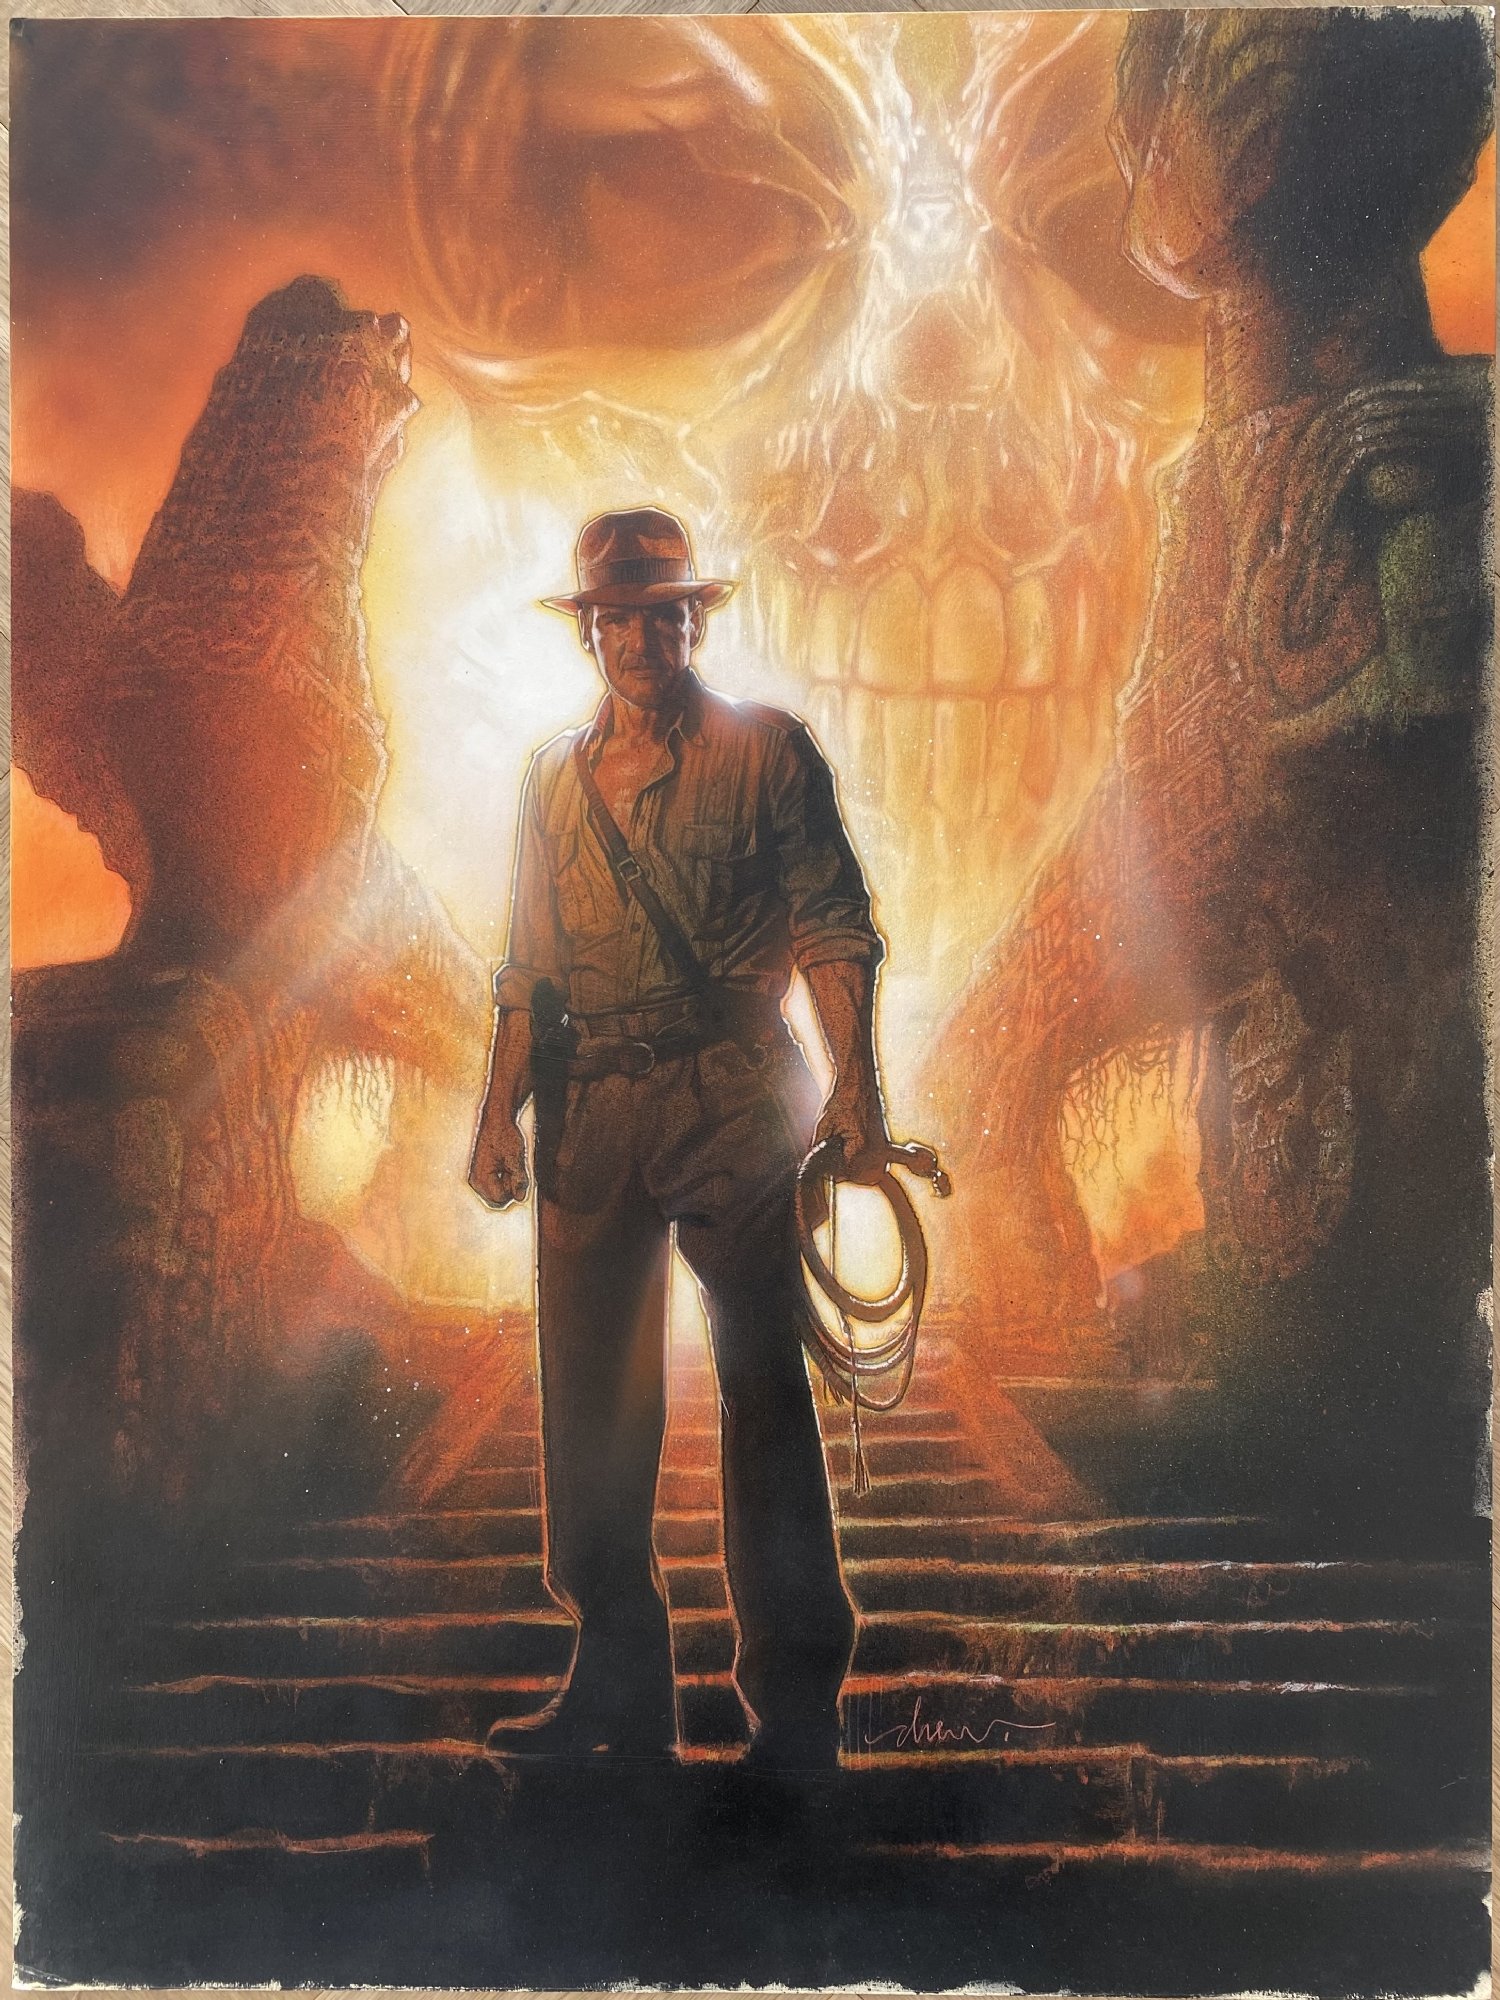 Indiana Jones and Temple of Doom - Movie Poster - US Version #2